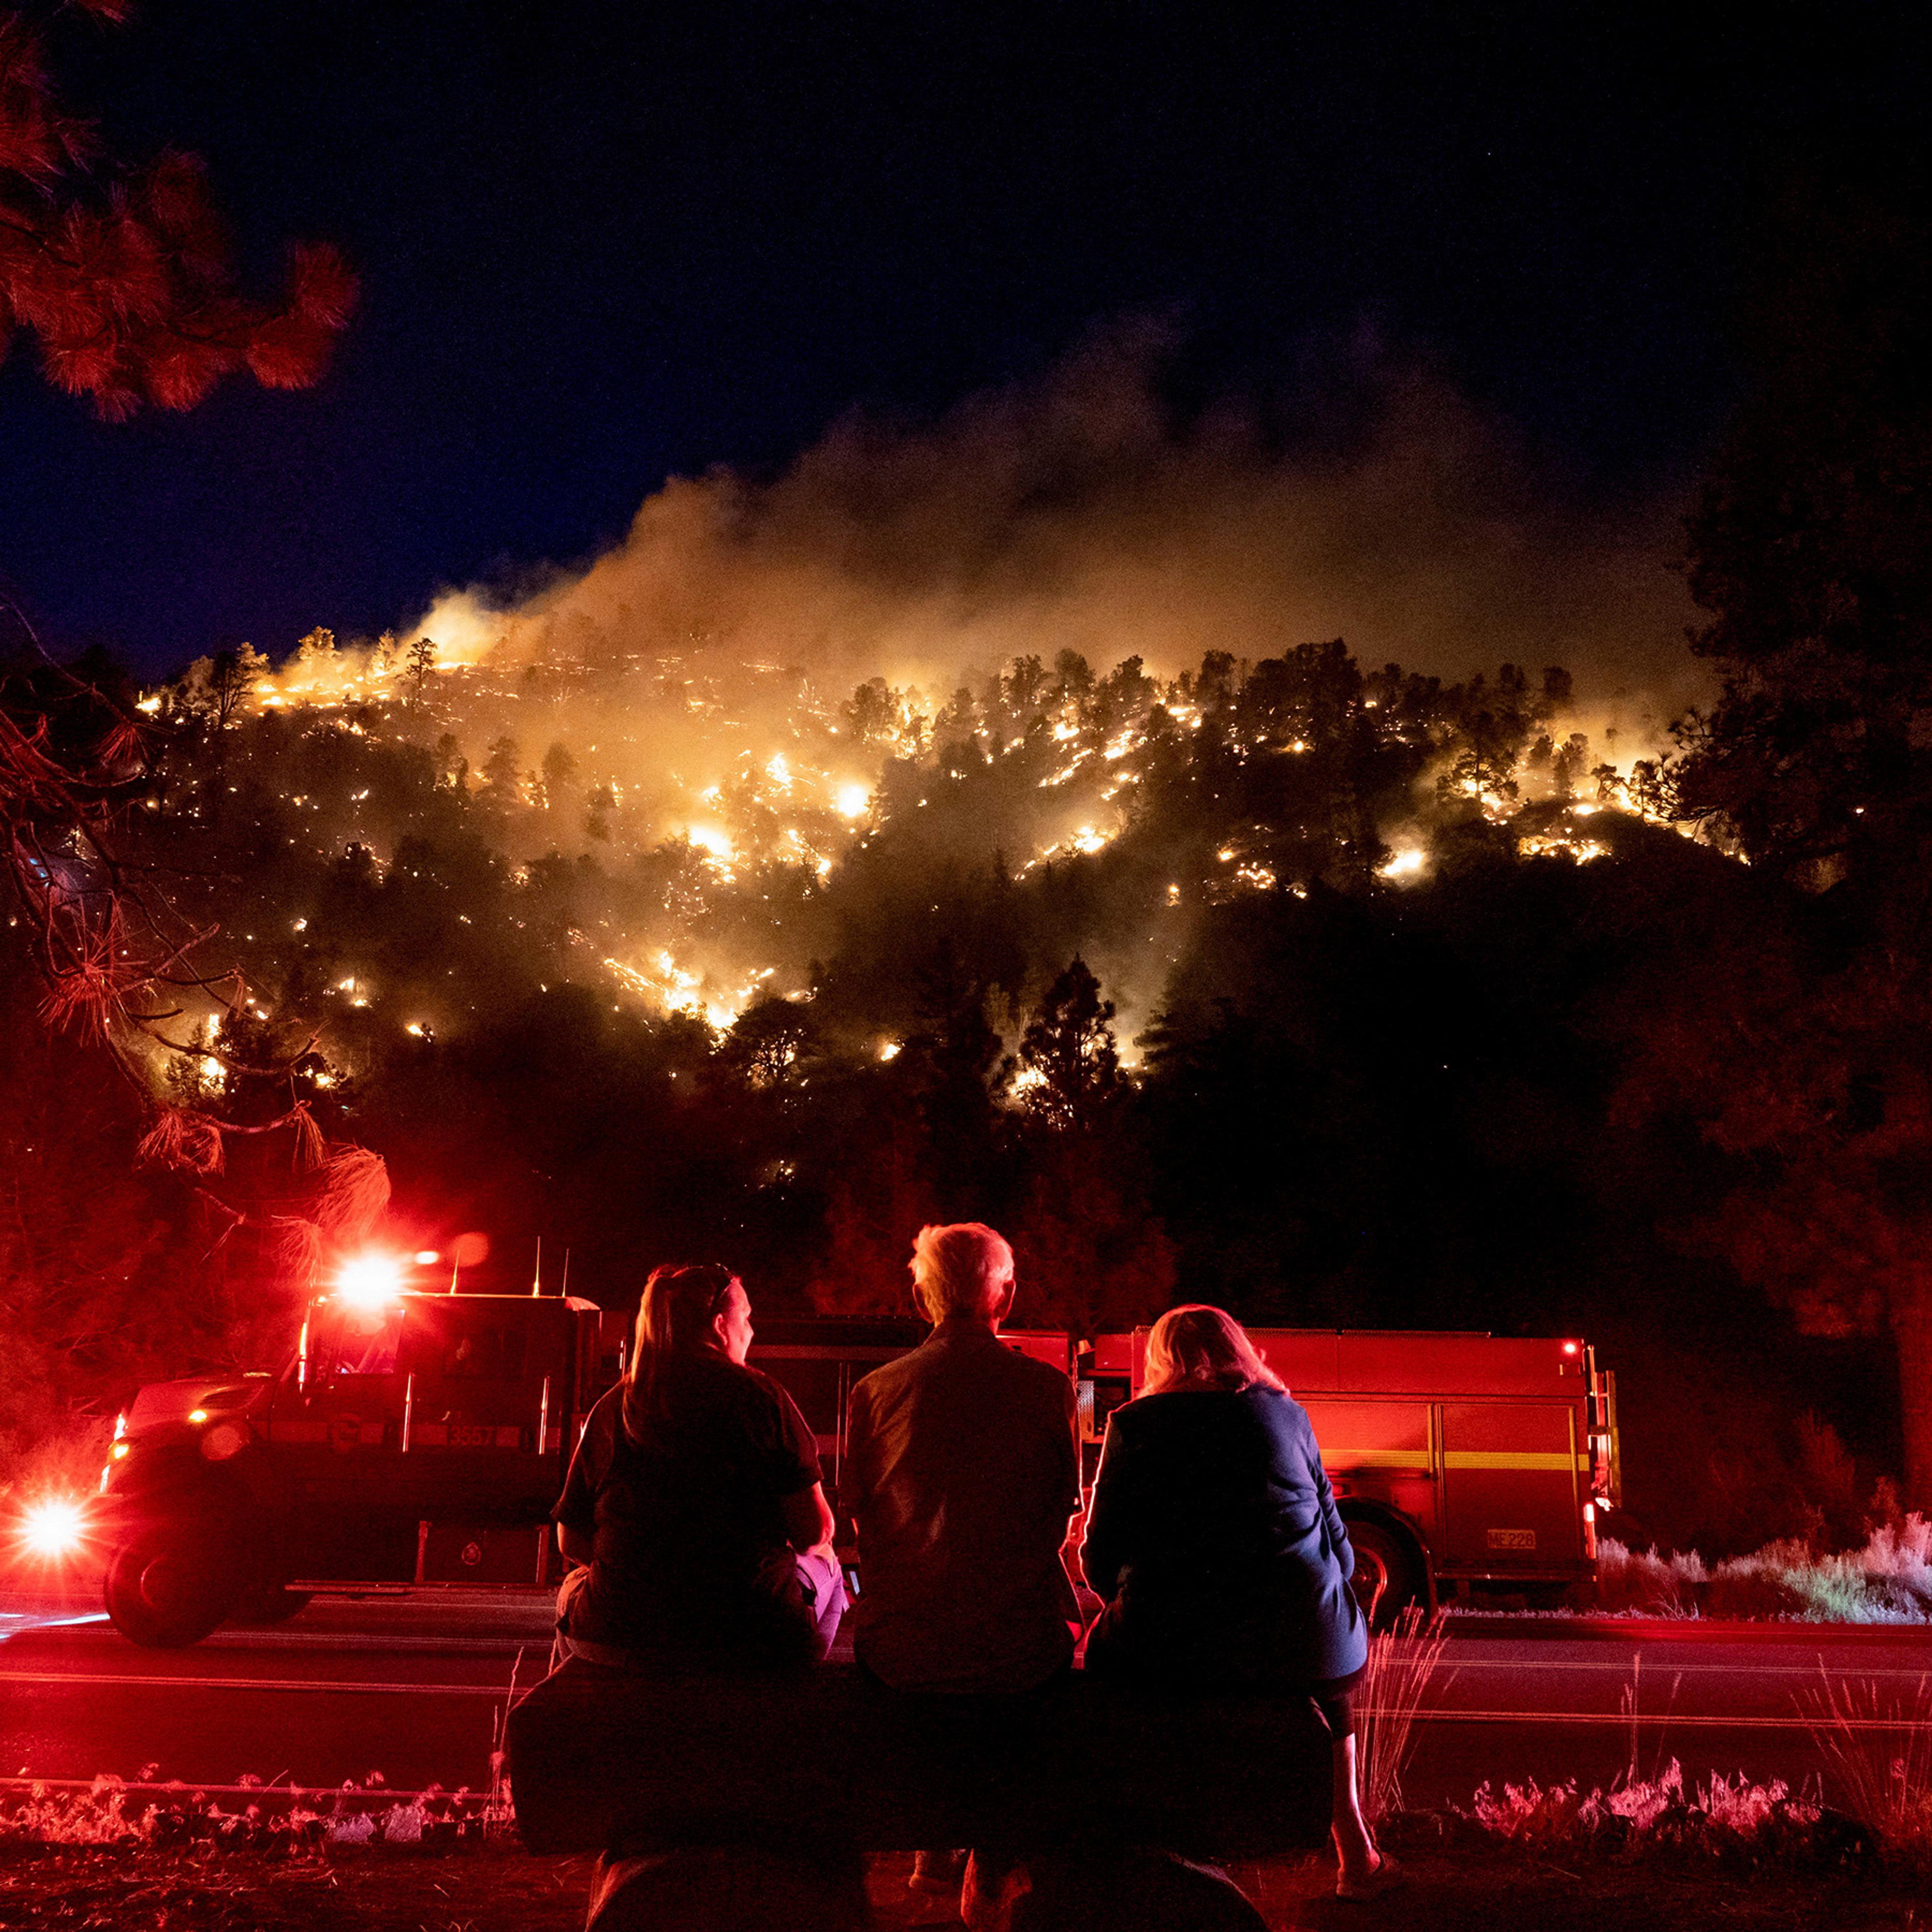 Three people sit on a bench facing a forest fire on a hill at night, with a fire truck parked nearby. The flames illuminate the trees, creating a dramatic and intense scene.